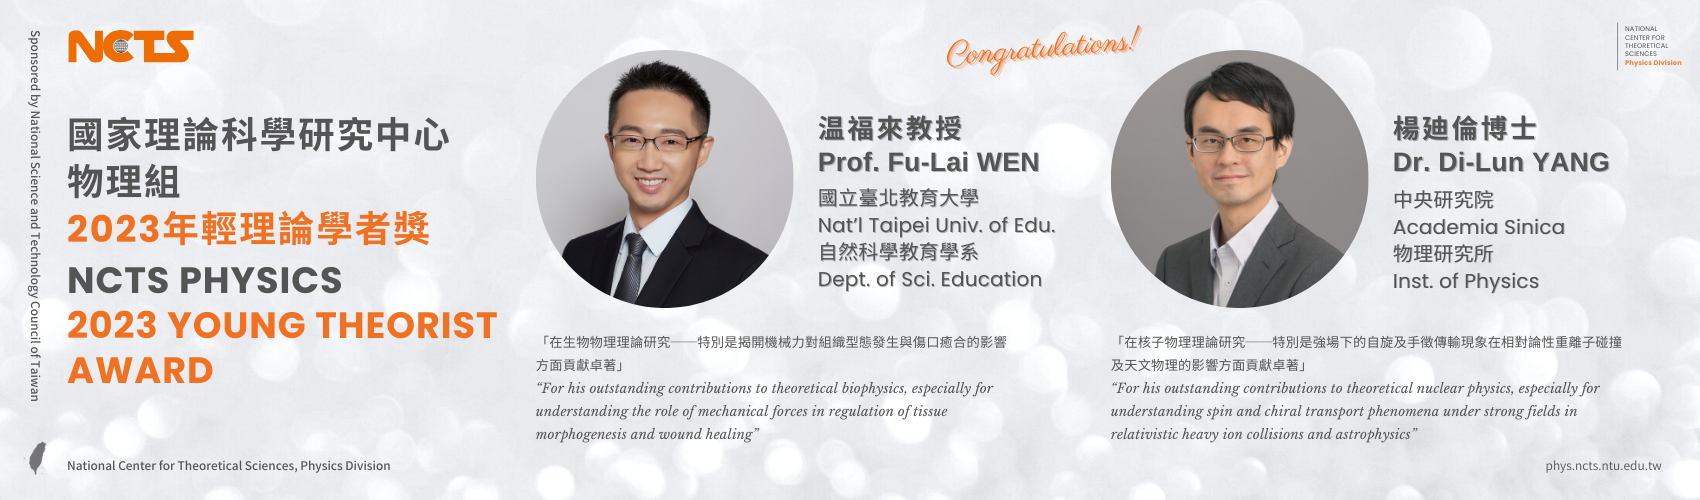 NCTS Congratulates Prof. Fu-Lai Wen & Dr. Di-Lun Yang on Winning 2023 Young Theorist Award